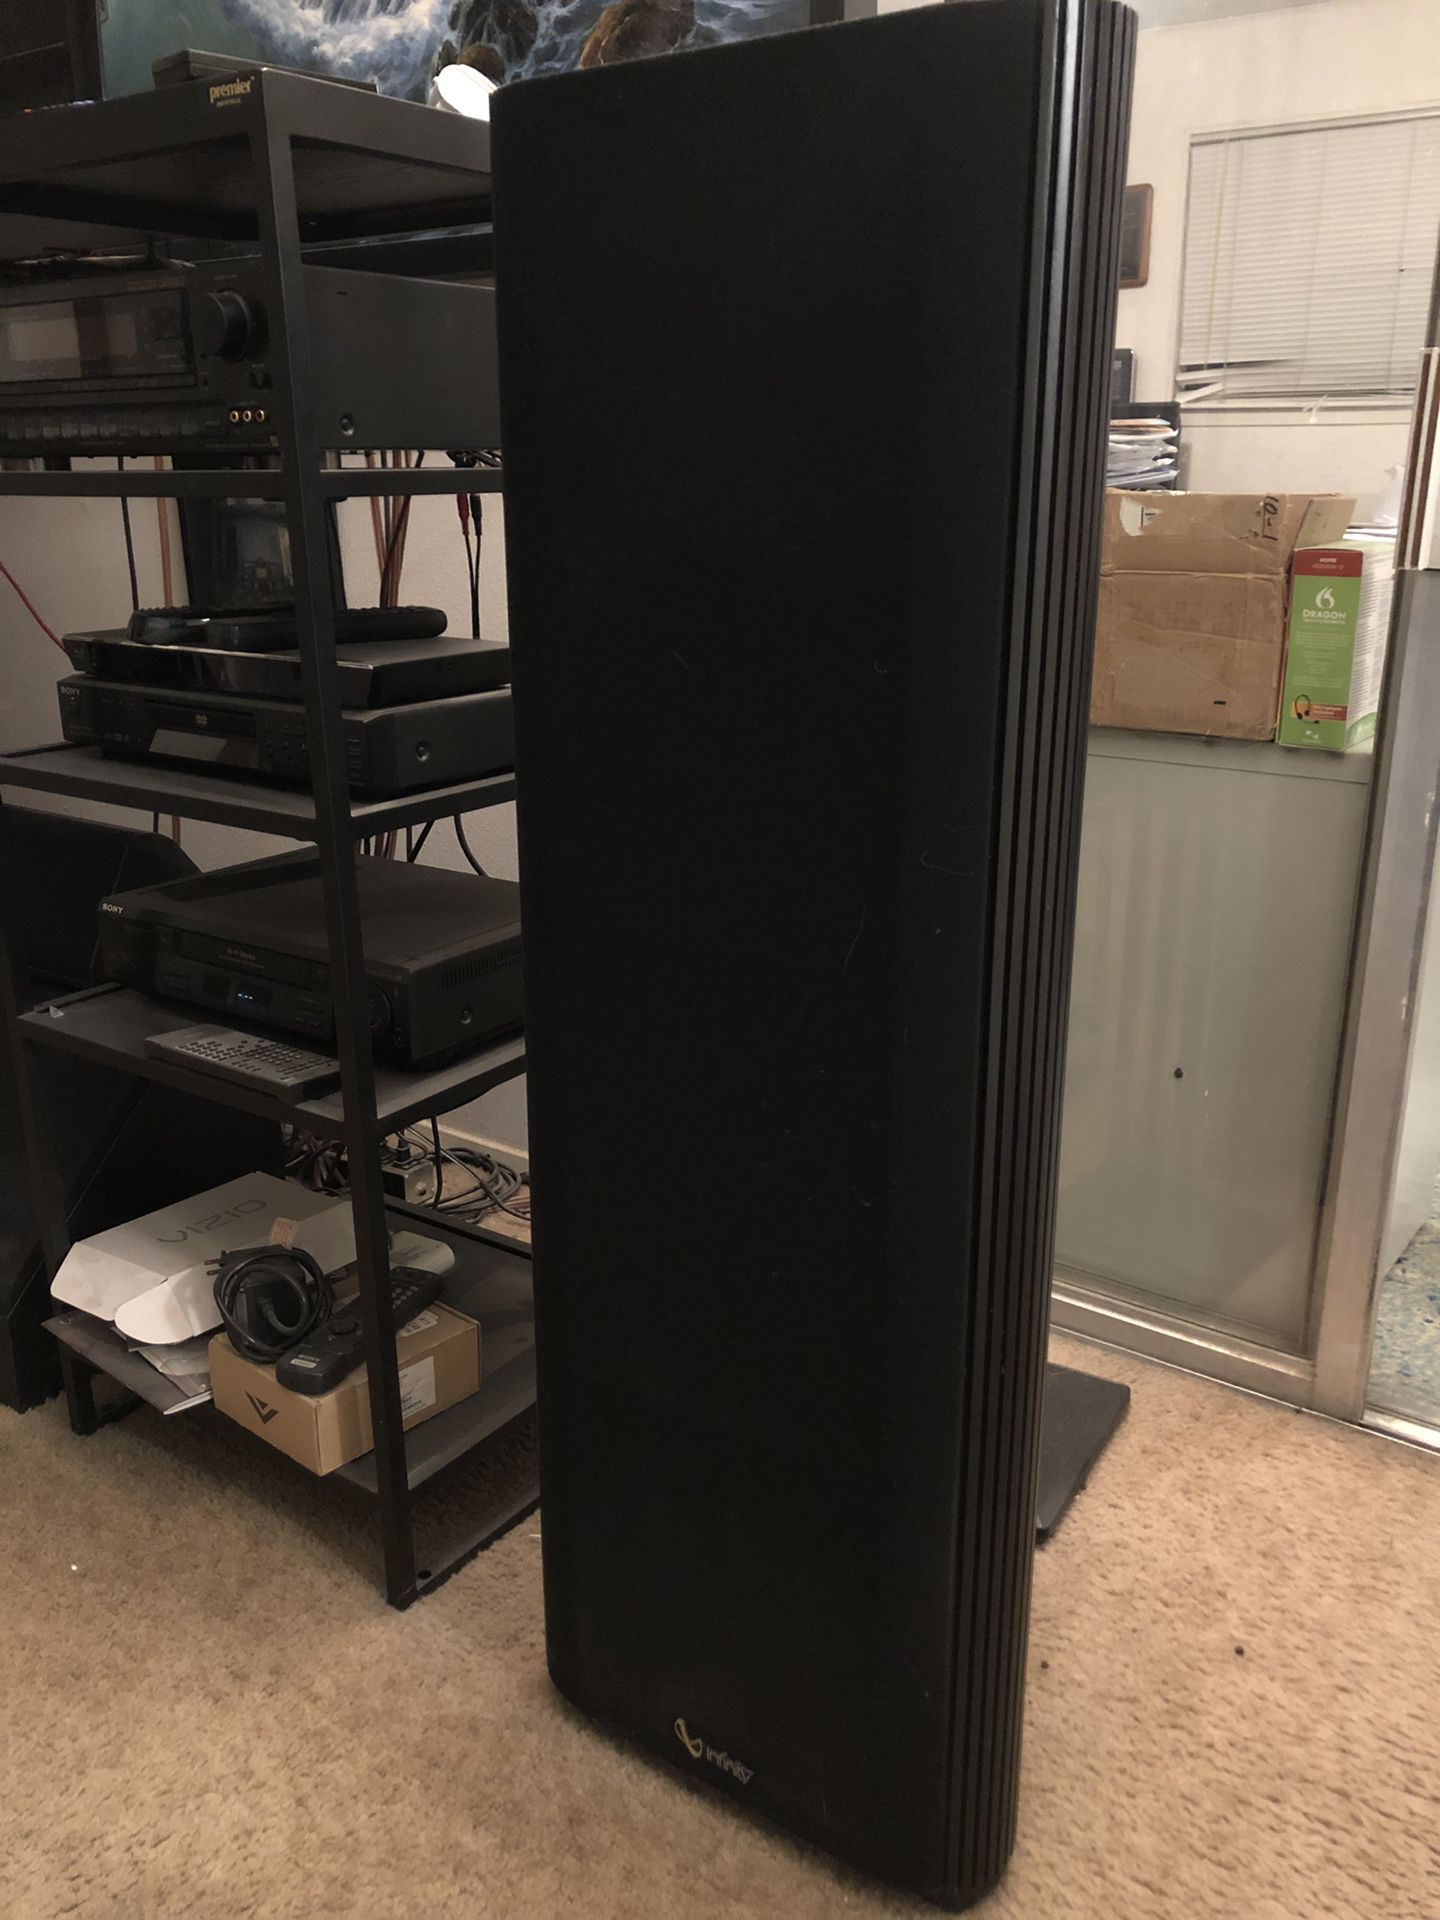 Complete Home Theatre Audio Speakers (6 speakers) - Infinity Kappa speakers and Infinity Subwoofer - Perfect condition